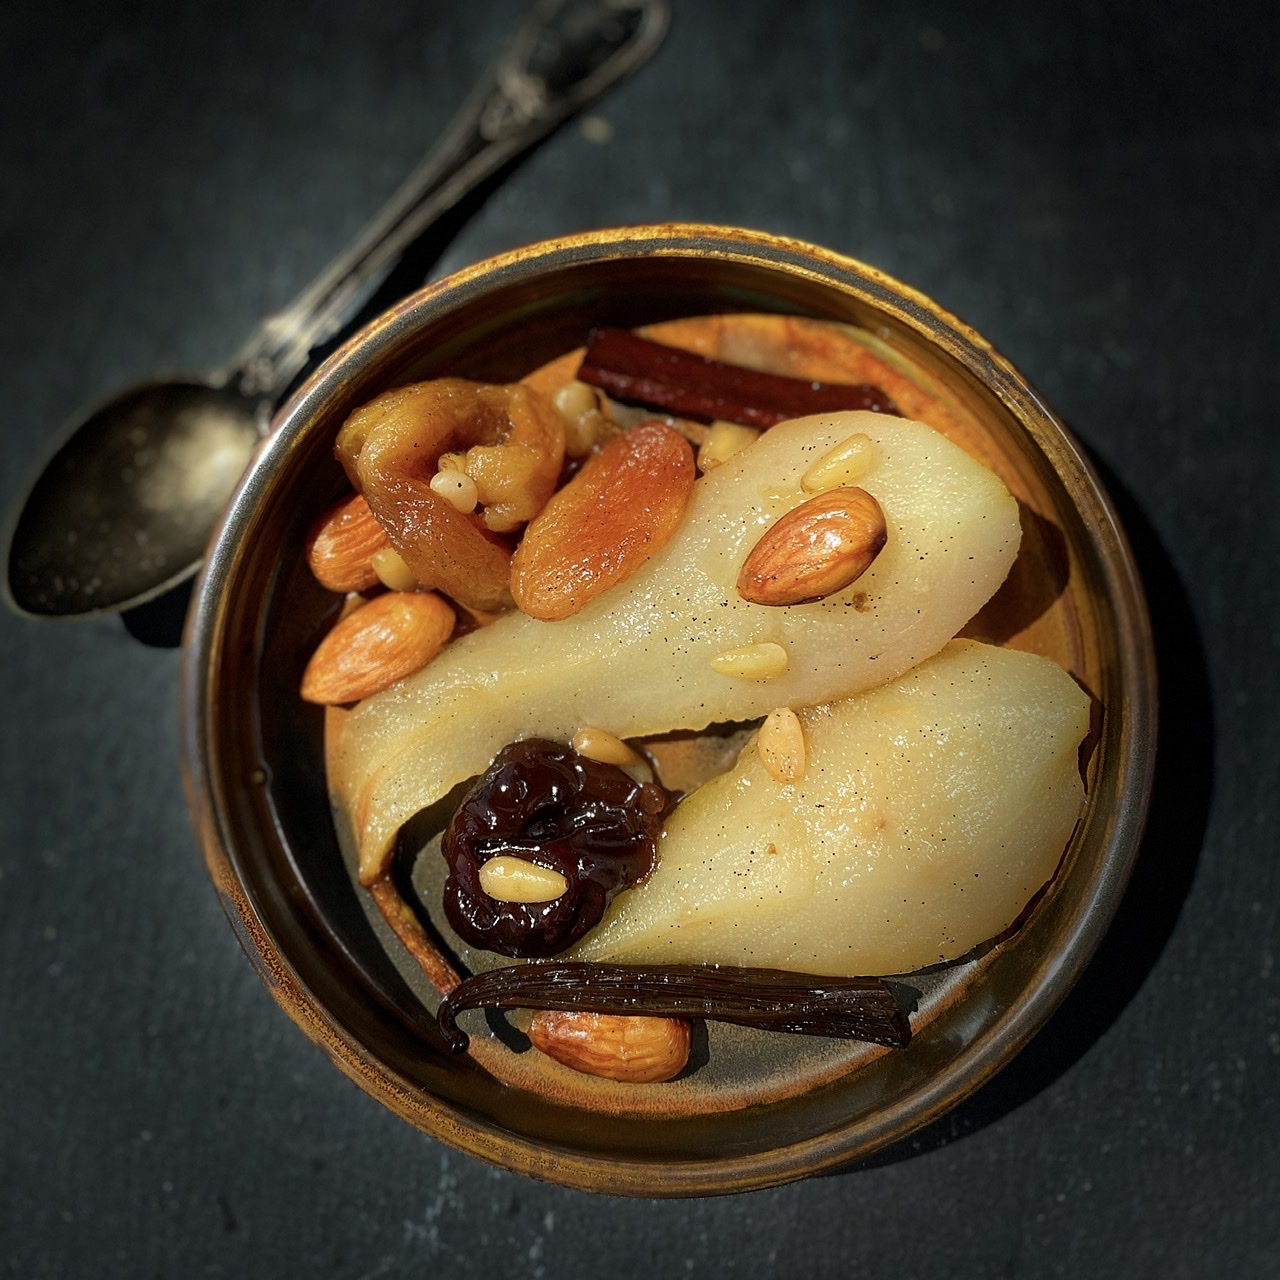 Pears and Dried Fruits in a Tagine